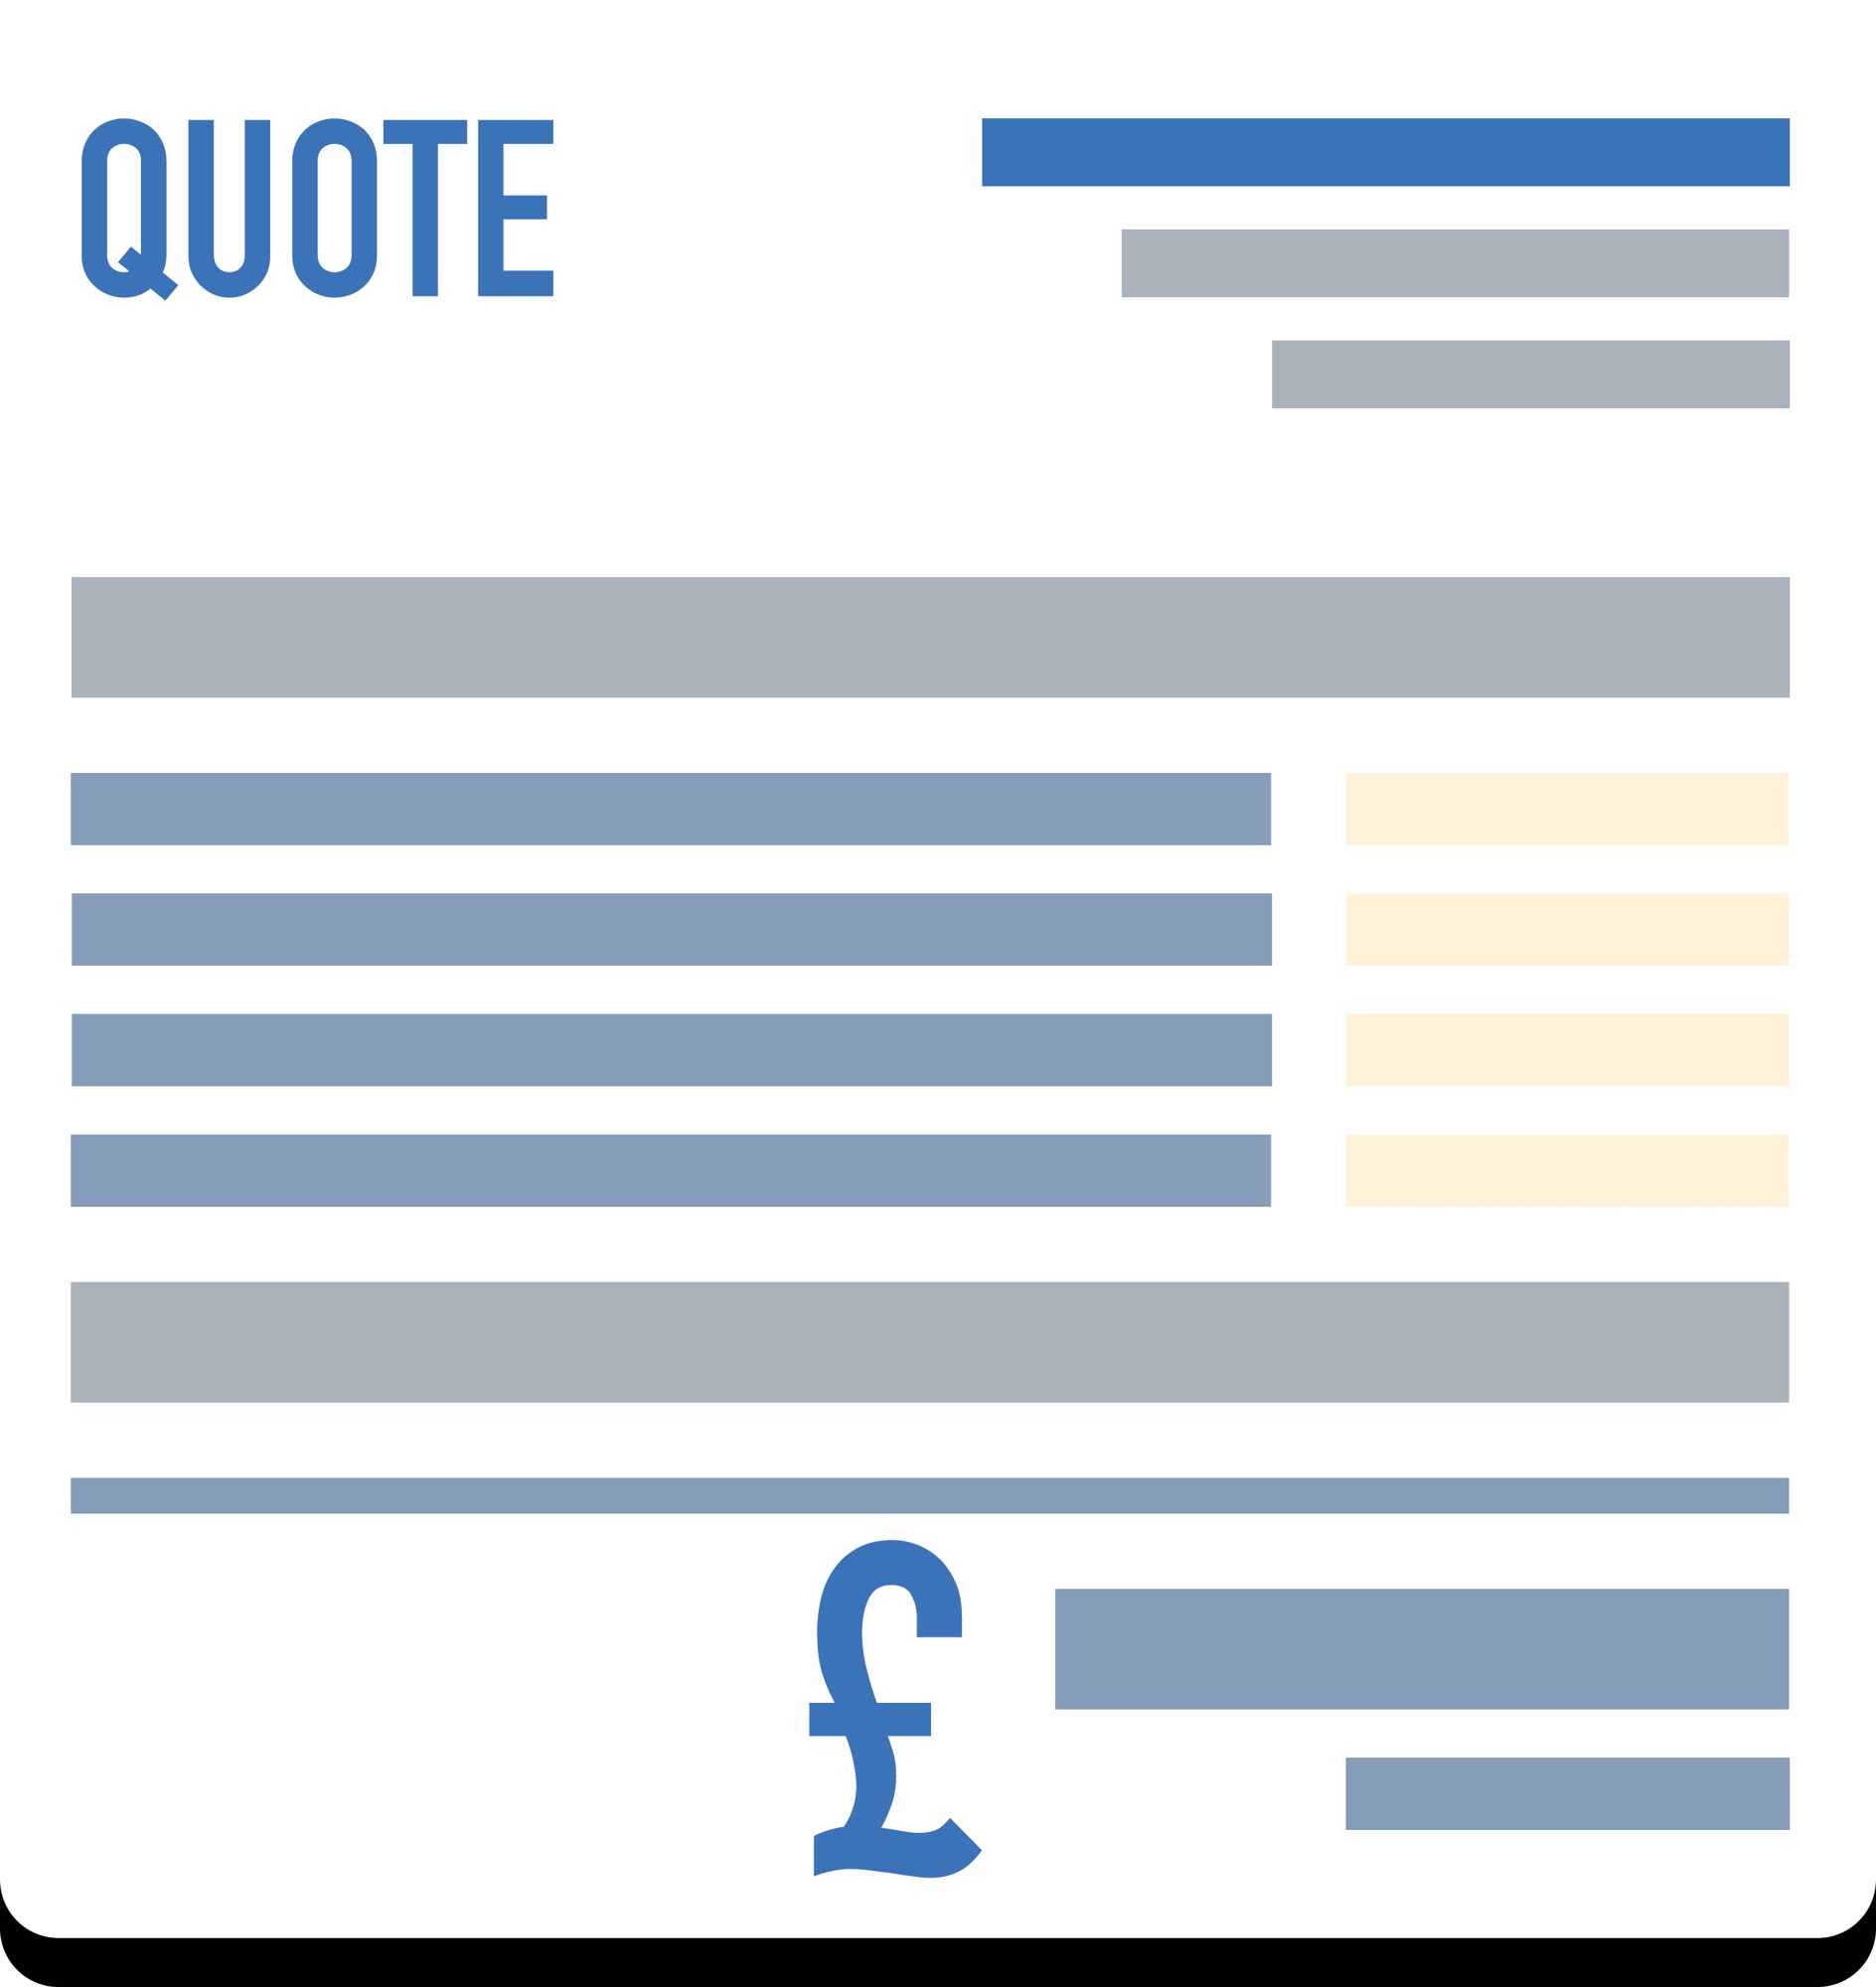 Quote template for Cleaning Companies